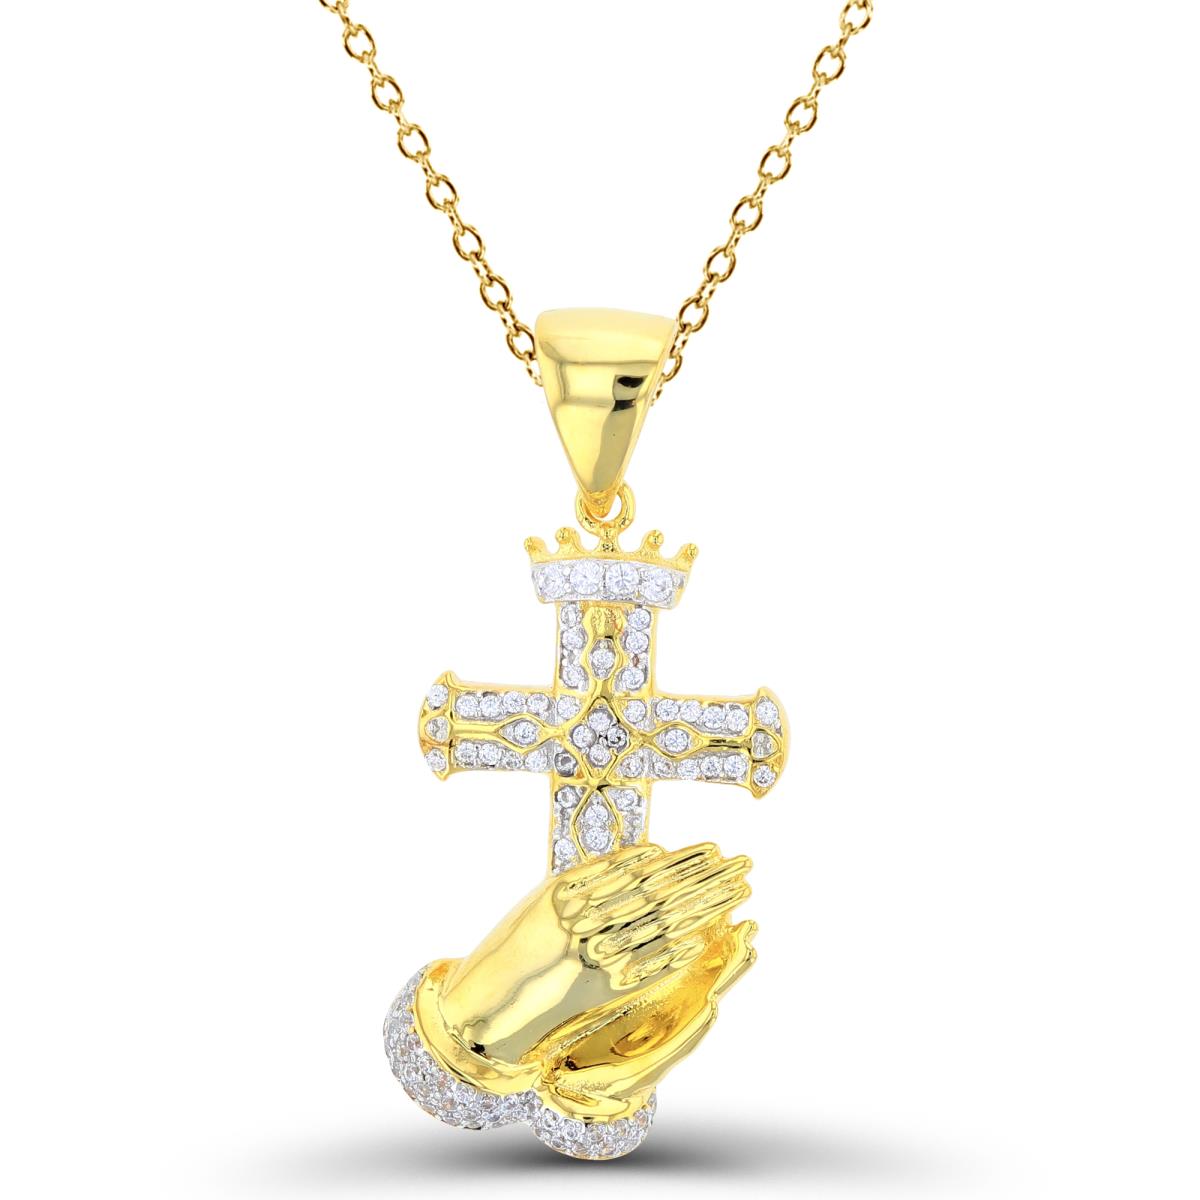 Sterling Silver Two-Tone (Y/W) High Polish & Textured Rnd White CZ Praying Hands with Cross 18"Necklace